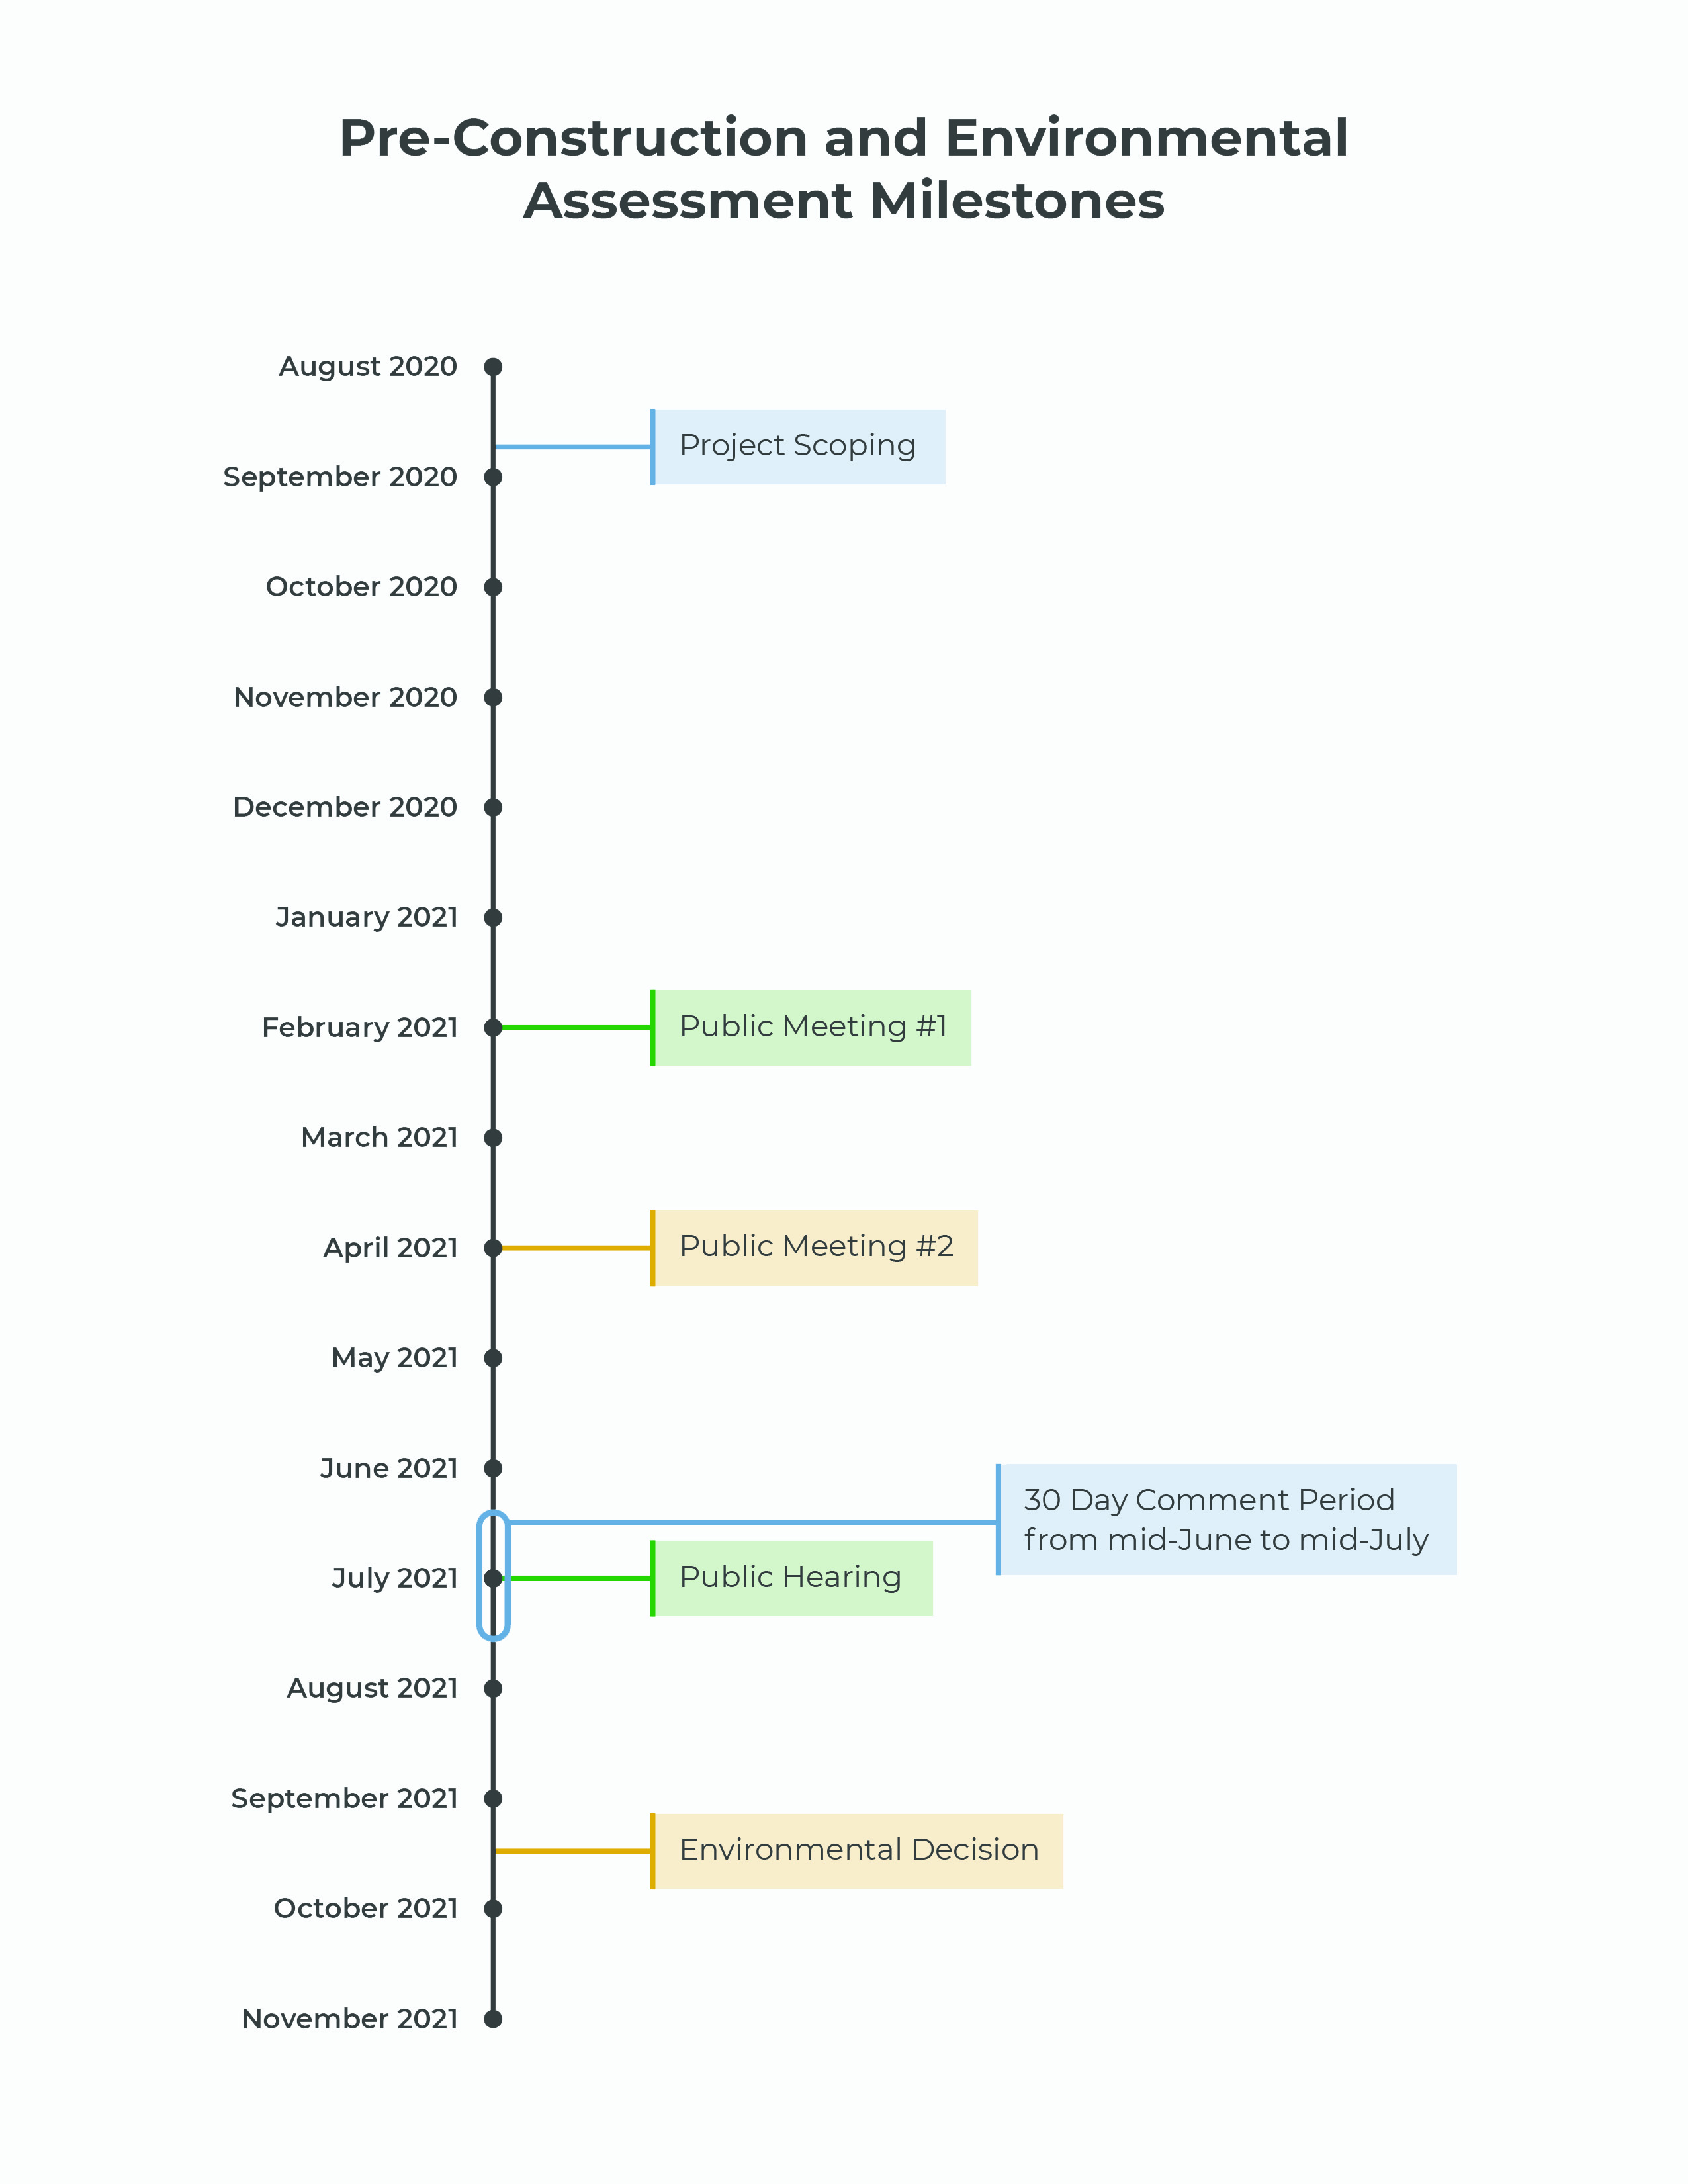 Timeline depicting project scoping in September 2020, public meetings in January and March 2021, 30-day comment period from mid-May to mid-June 2021, public hearing in June 2021, and environmental decision in mid-August 2021.